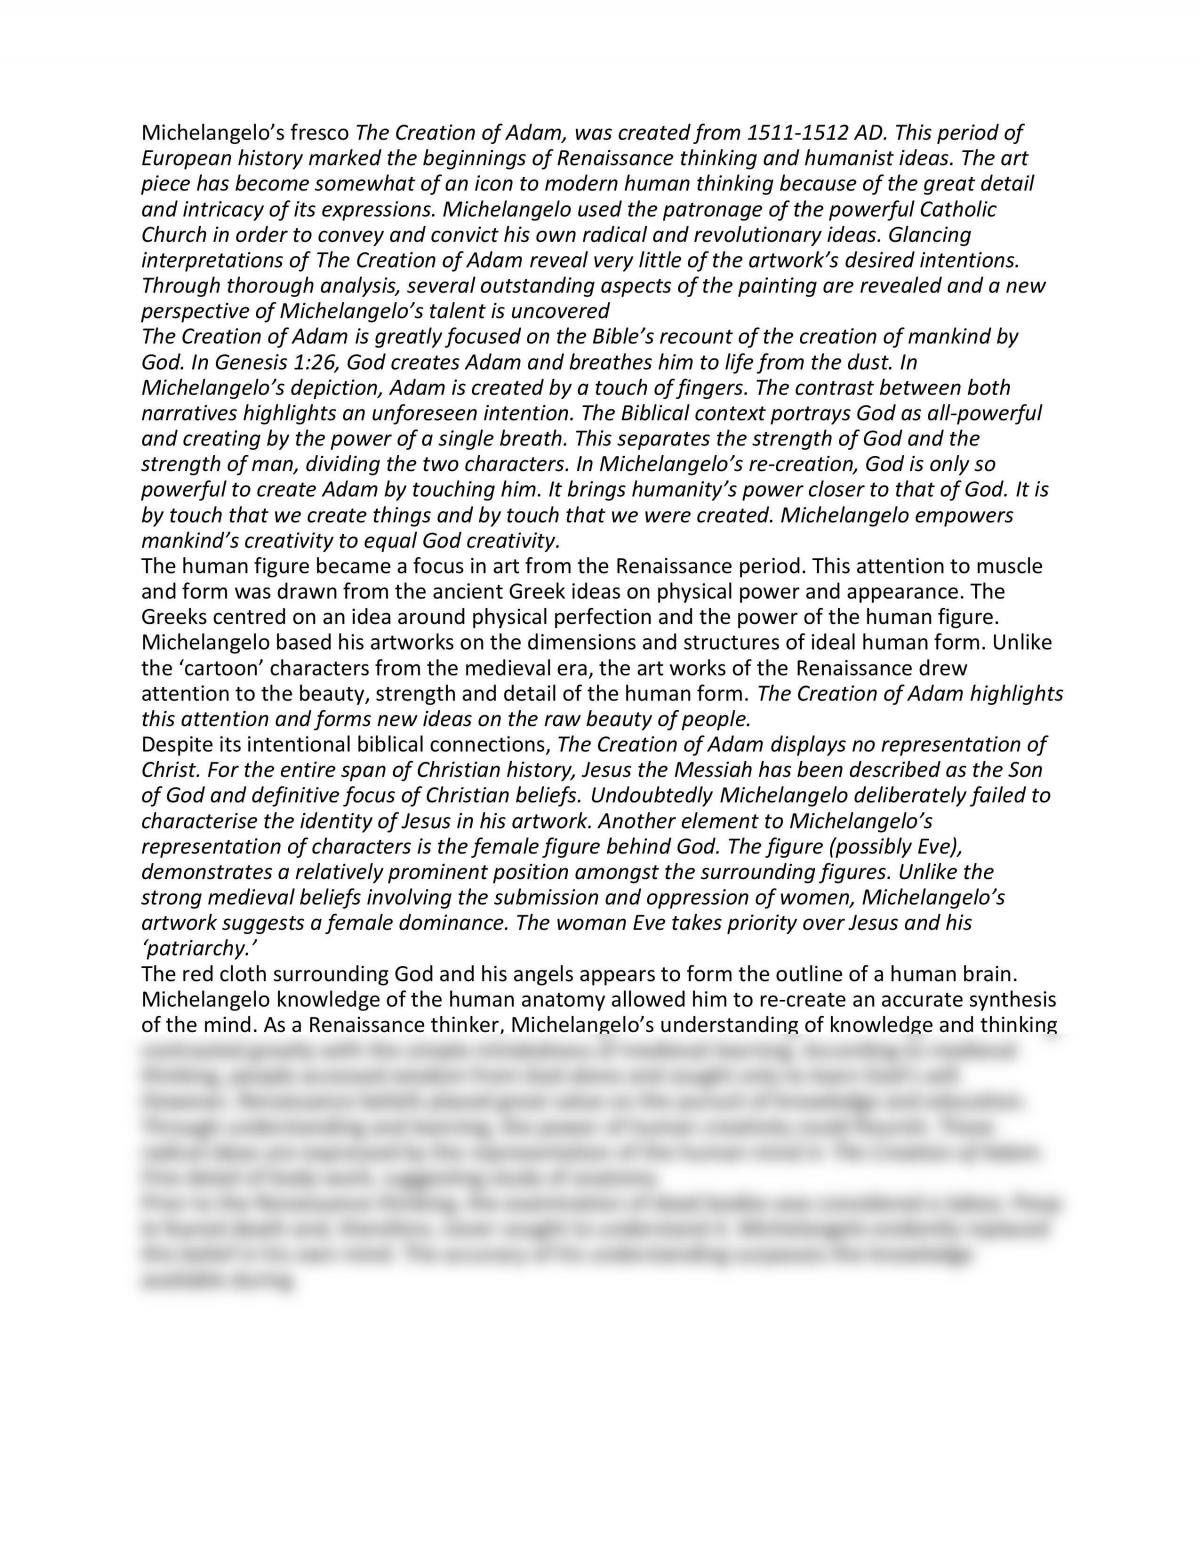 The Creation of Adam Essay - Page 1